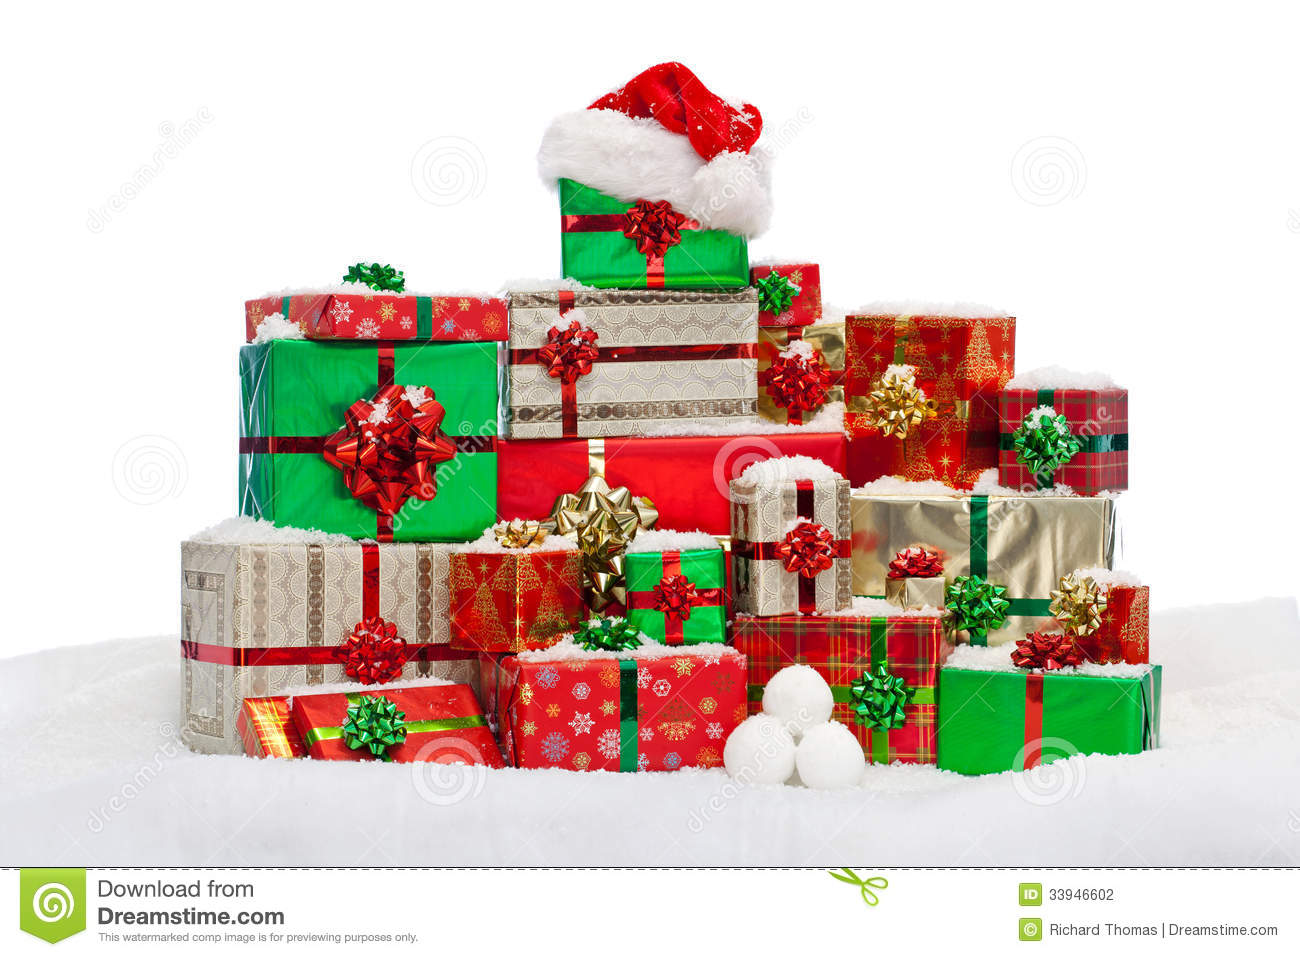 Stack Of Gift Wrapped Christmas Presents On Snow Isolated Against A